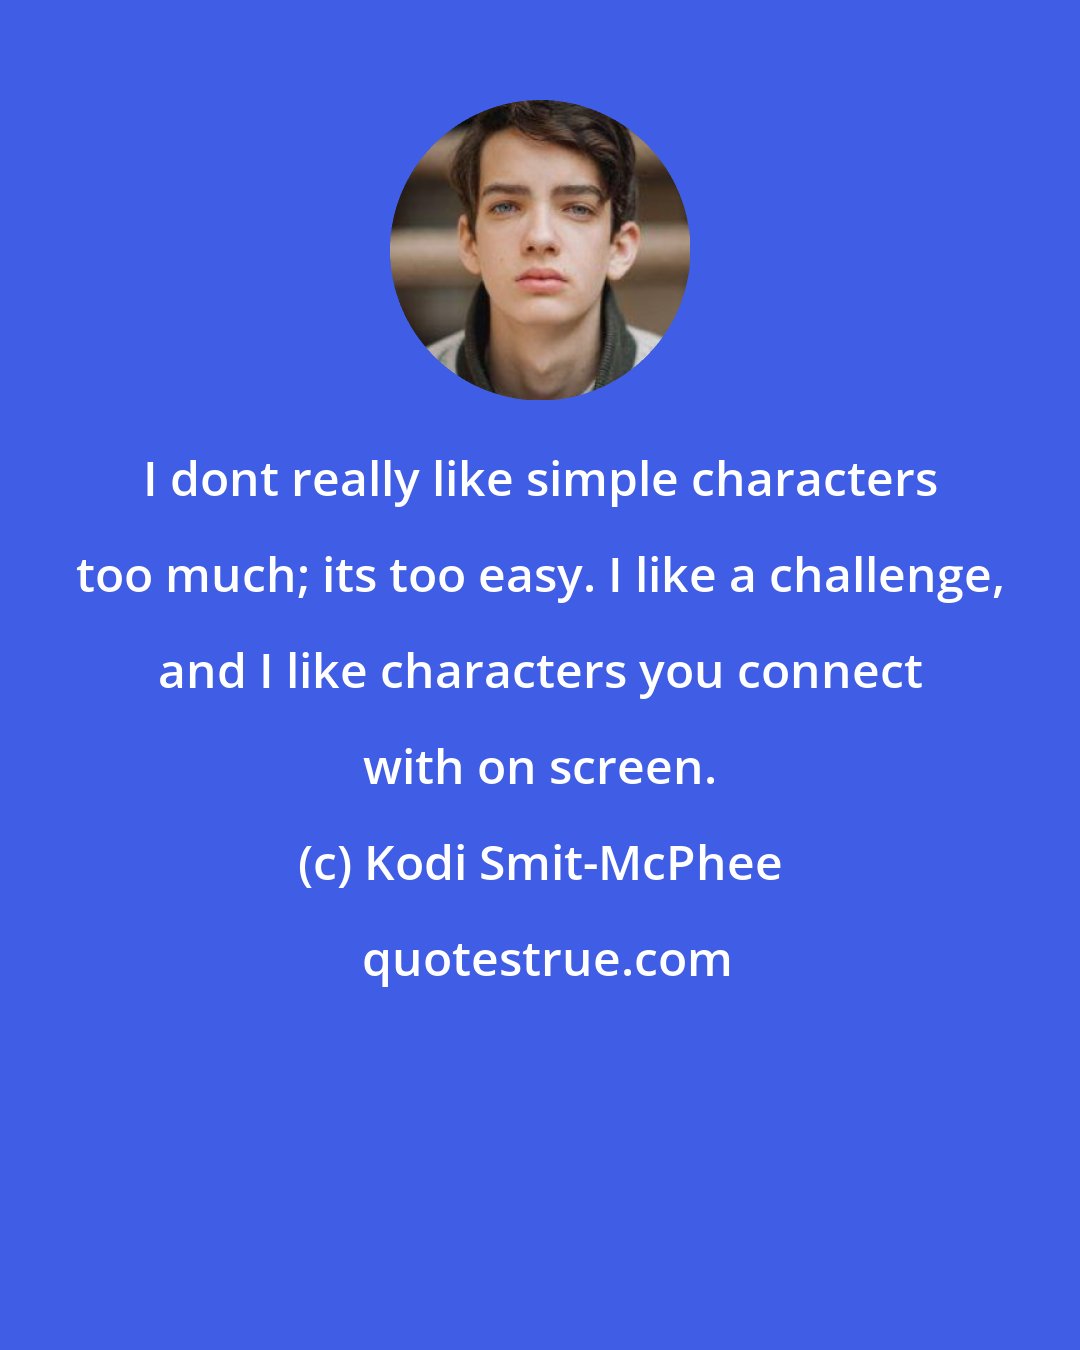 Kodi Smit-McPhee: I dont really like simple characters too much; its too easy. I like a challenge, and I like characters you connect with on screen.